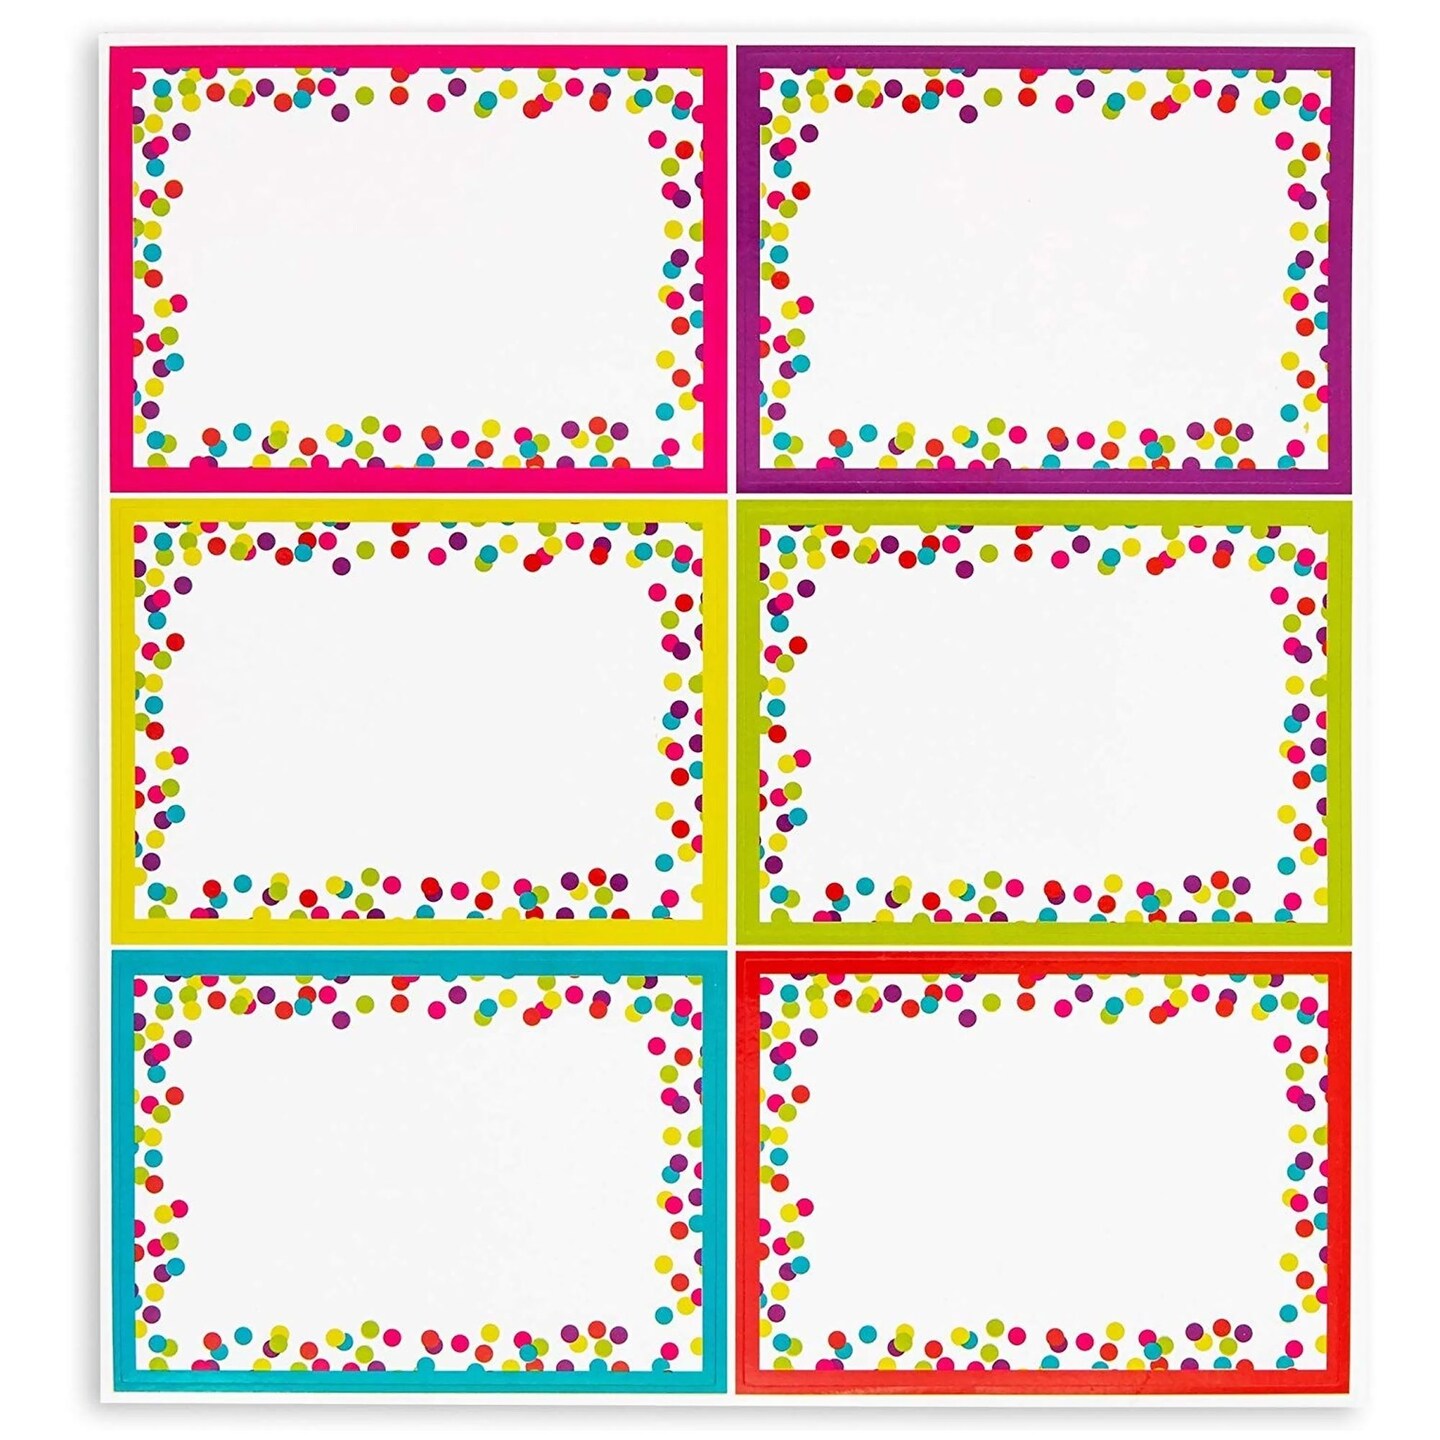 Classroom Labels Classroom Storage Labels Cubby Decals Office